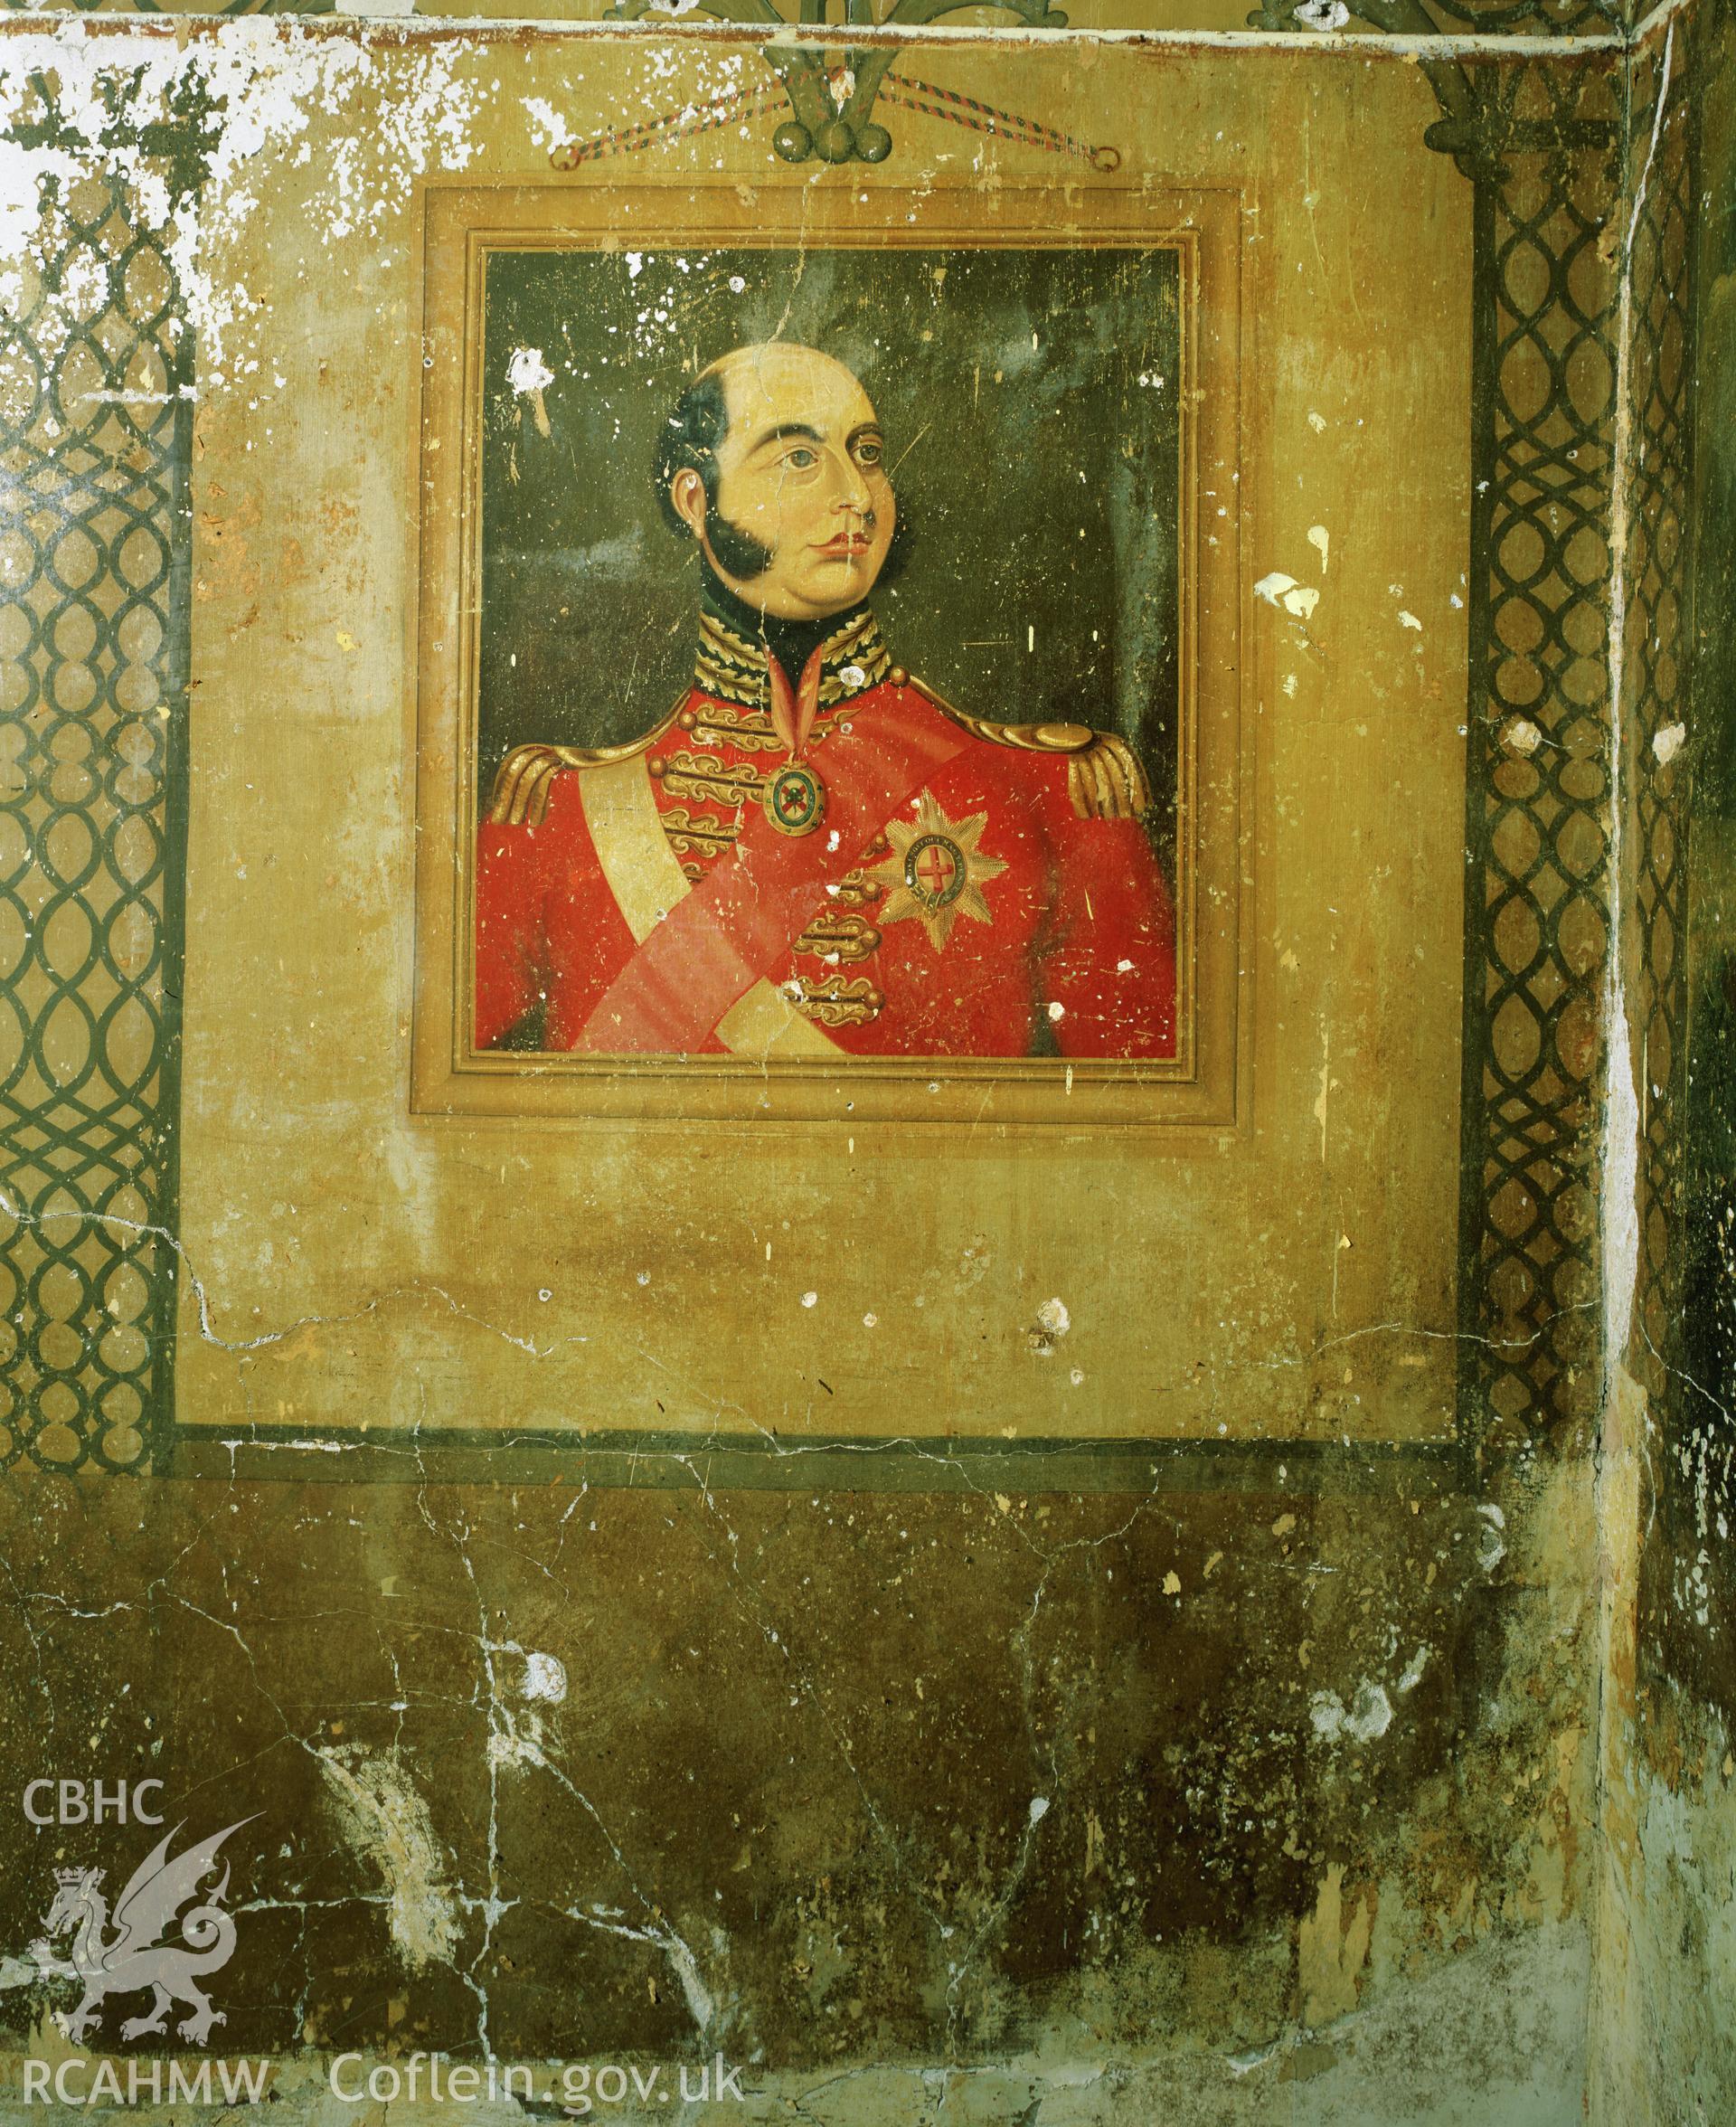 RCAHMW colour transparency showing framed portrait of a naval officer, at Elwy Bank, St Asaph, photographed by Iain Wright, November 2003.